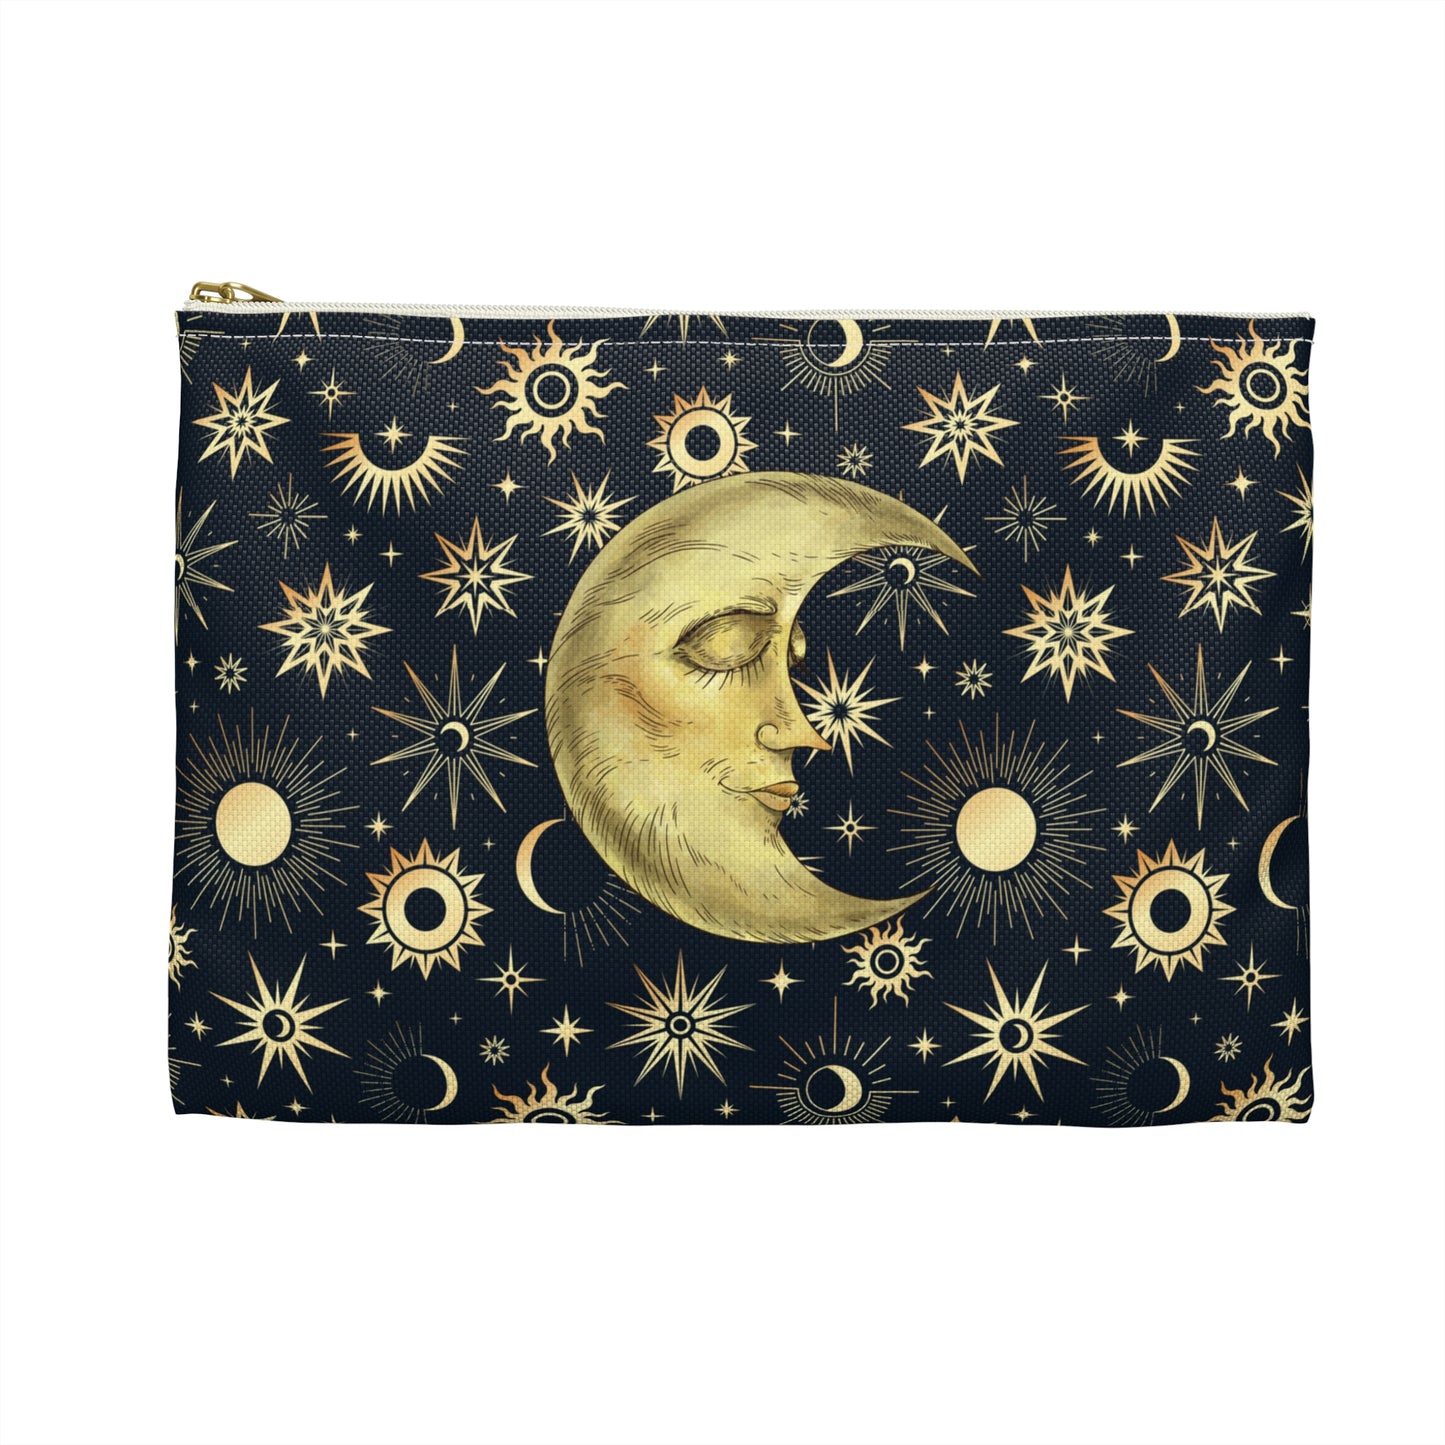 Celestial Pouch. Zipper Accessories Travel Documents Pouch pencil case, cosmetic and travel bags